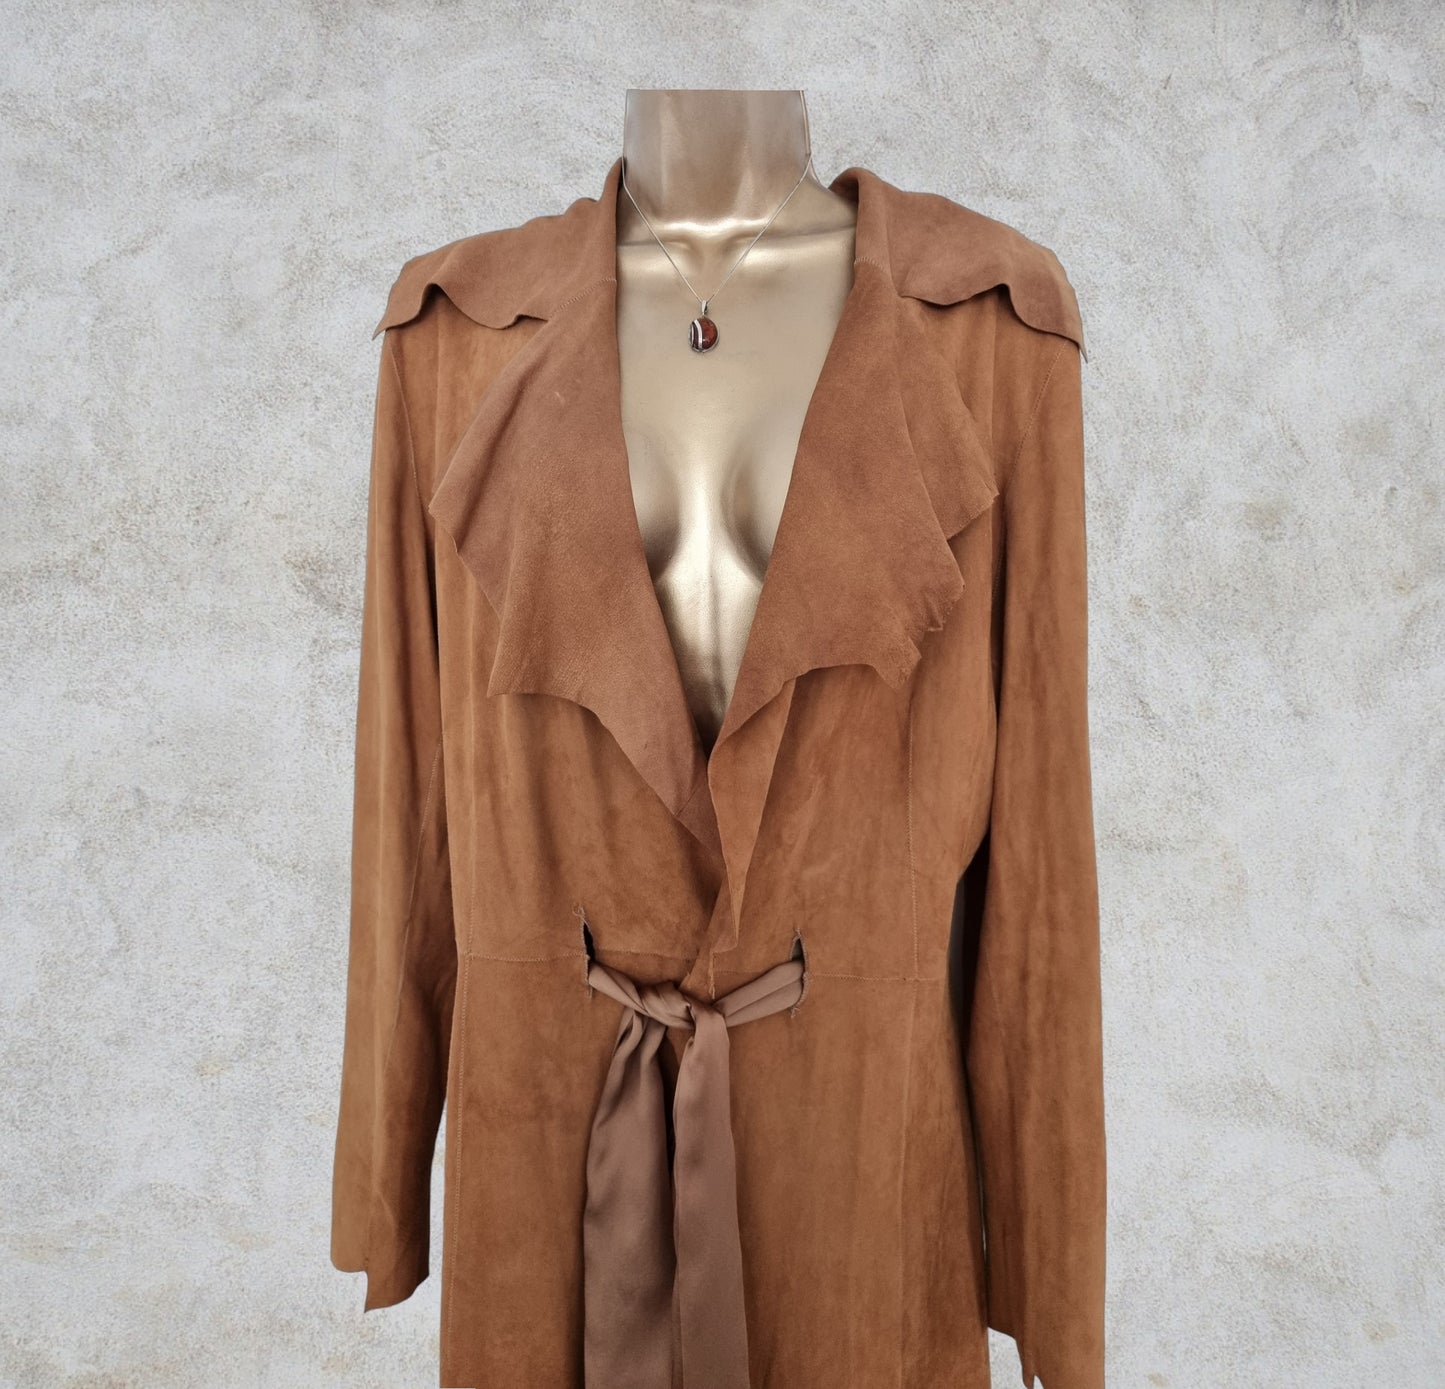 Genuine Real Leather Vintage Long Tan Suede Belted Coat. UK 16 US 12 EU 44 Timeless Fashions